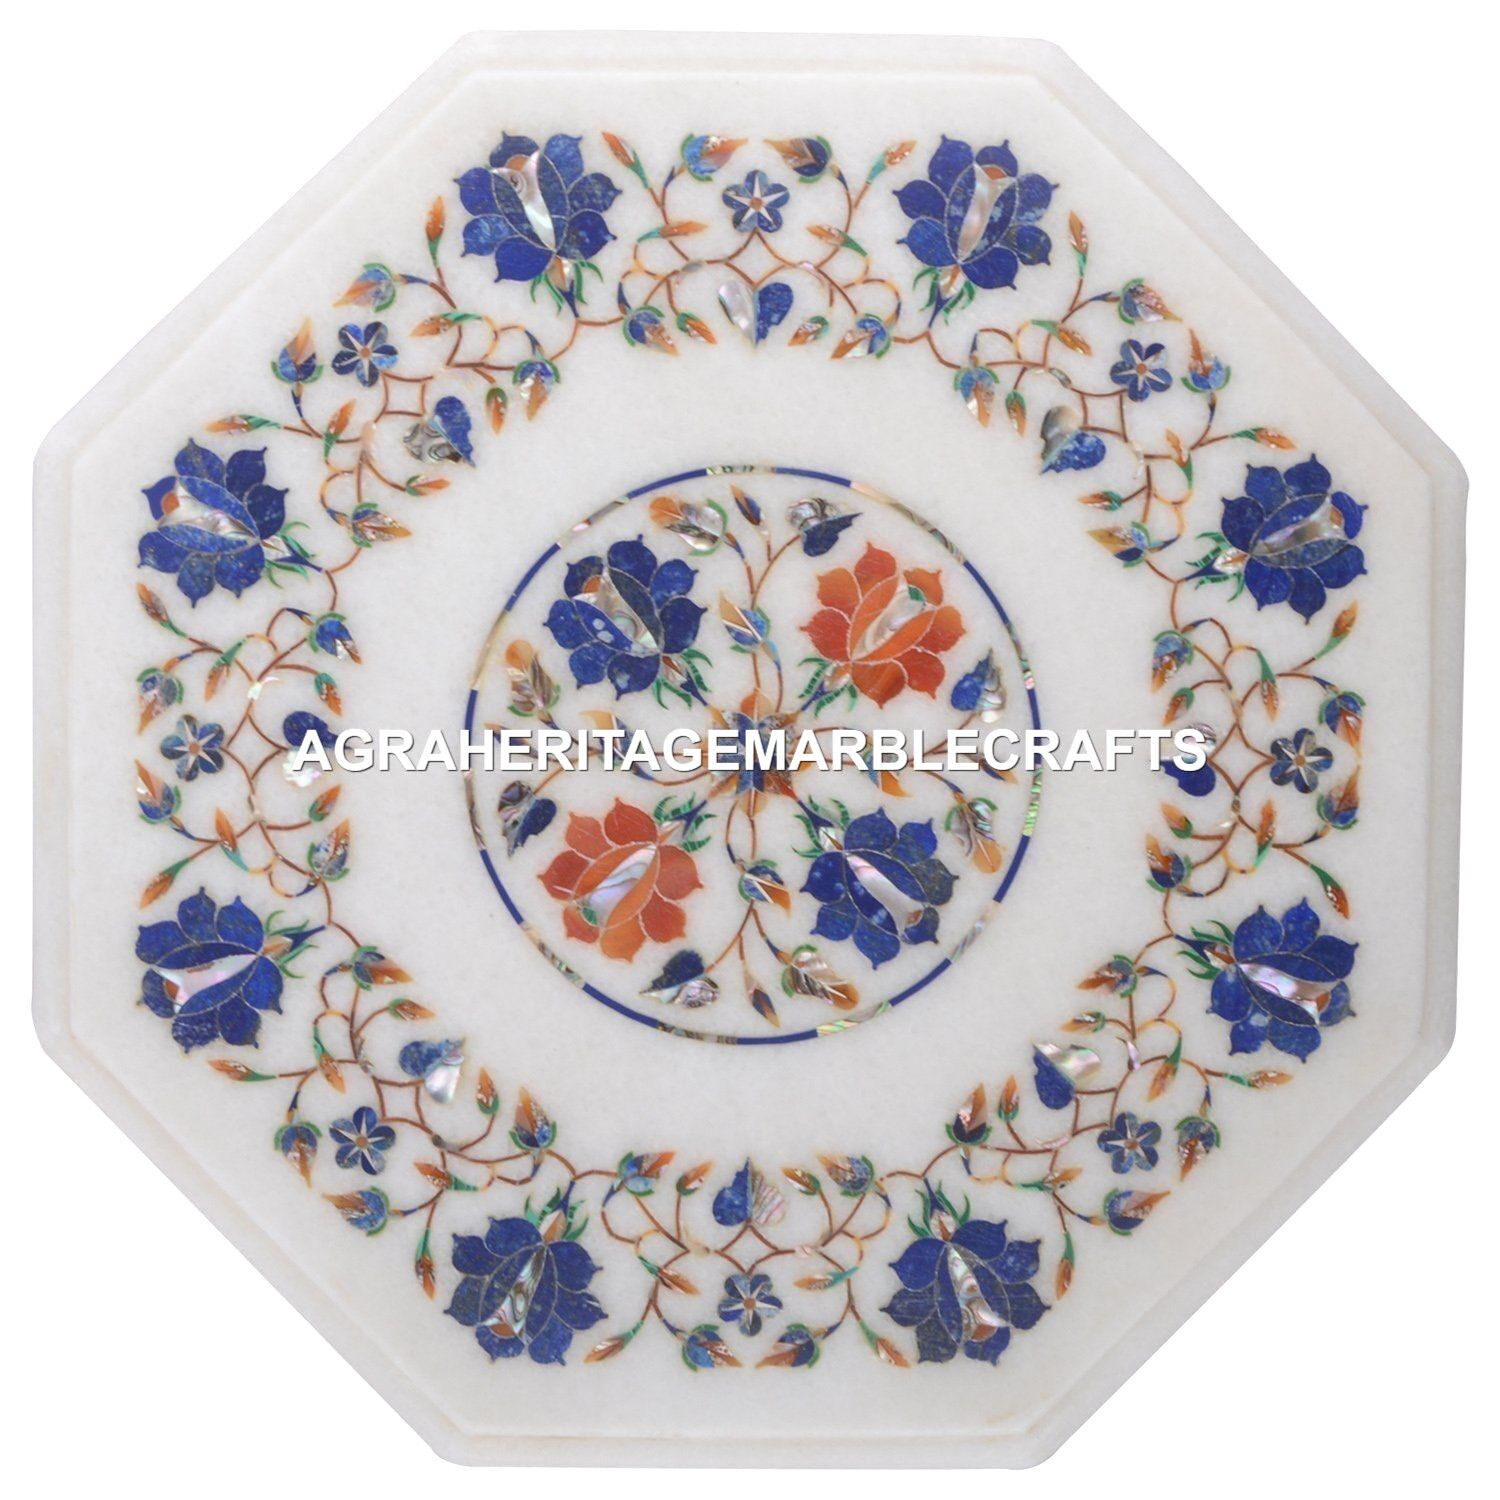 White Marble Coffee Table Top Rare Lapis Lazuli Inlay Marquetry Furniture H2473 - $321.17 - $428.58